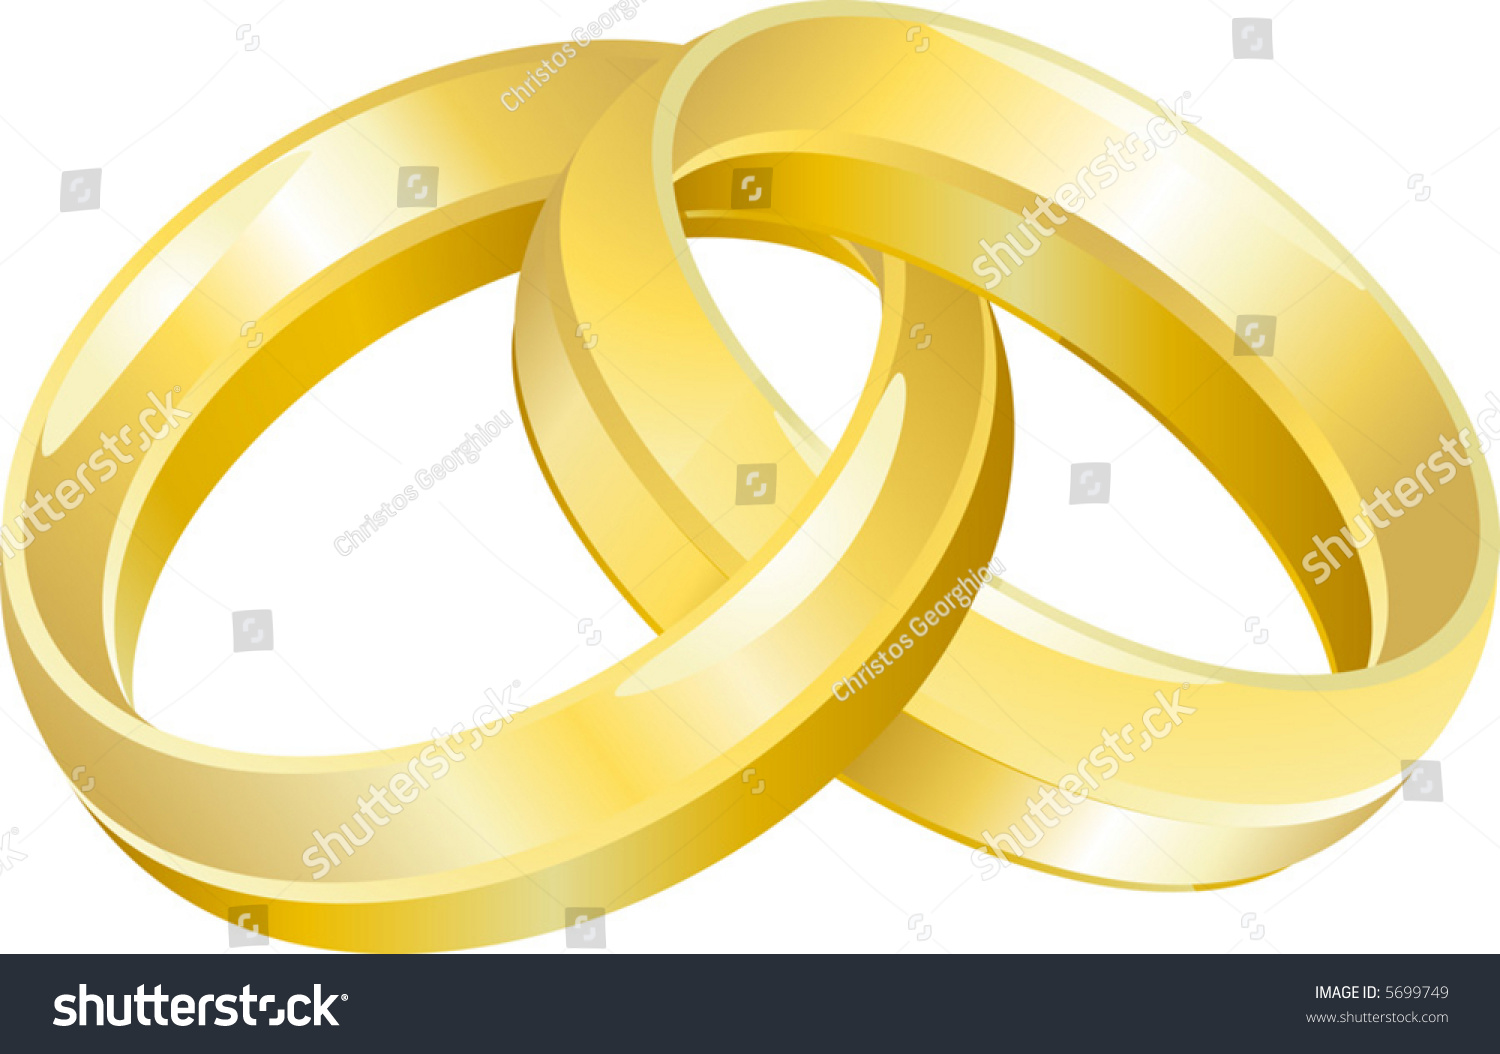 Stock Vector Wedding Bands A Vector Illustration Of Intertwined Wedding Bands Or Rings 5699749 